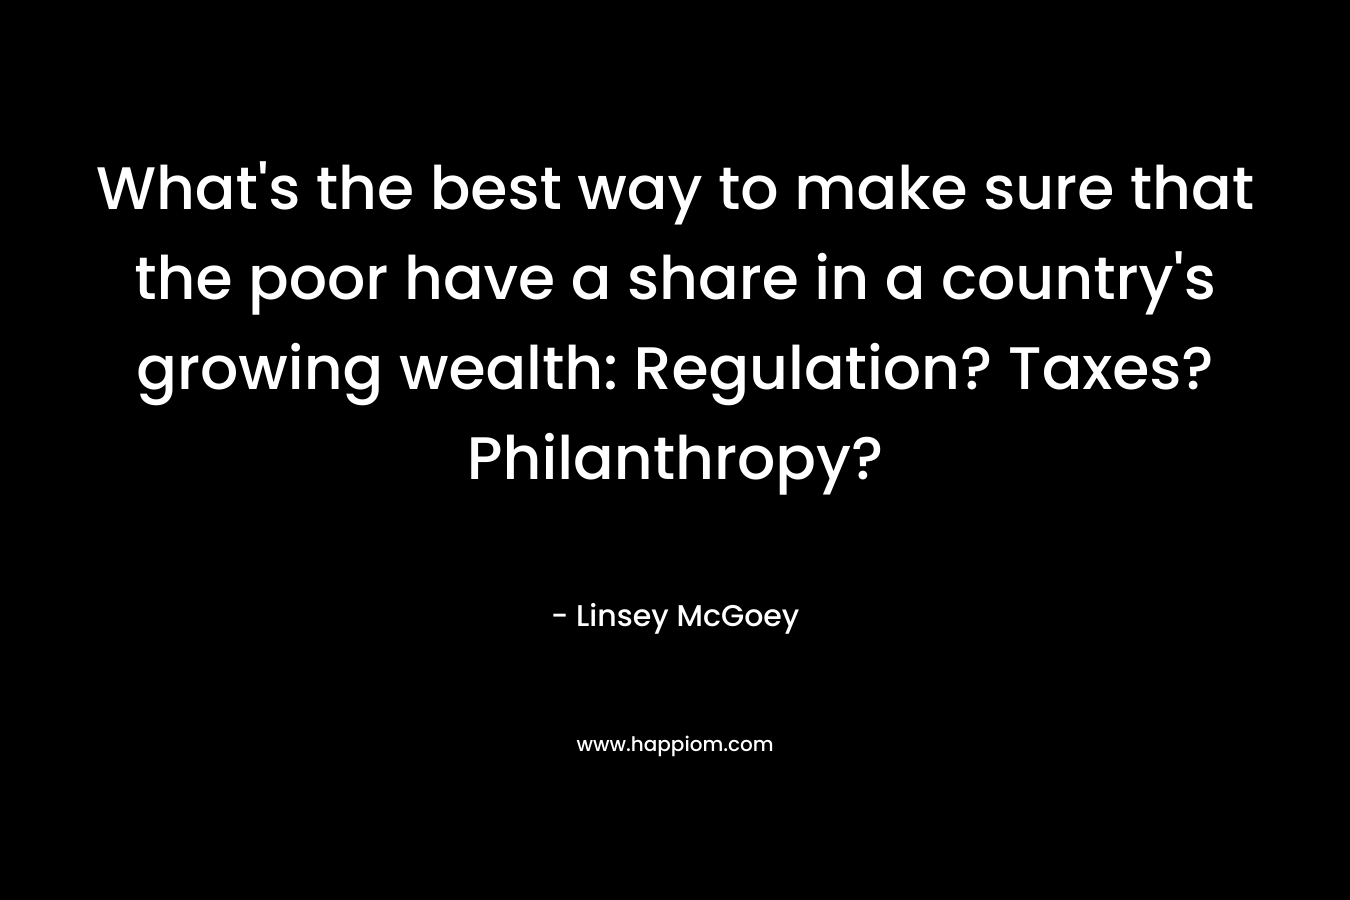 What's the best way to make sure that the poor have a share in a country's growing wealth: Regulation? Taxes? Philanthropy?